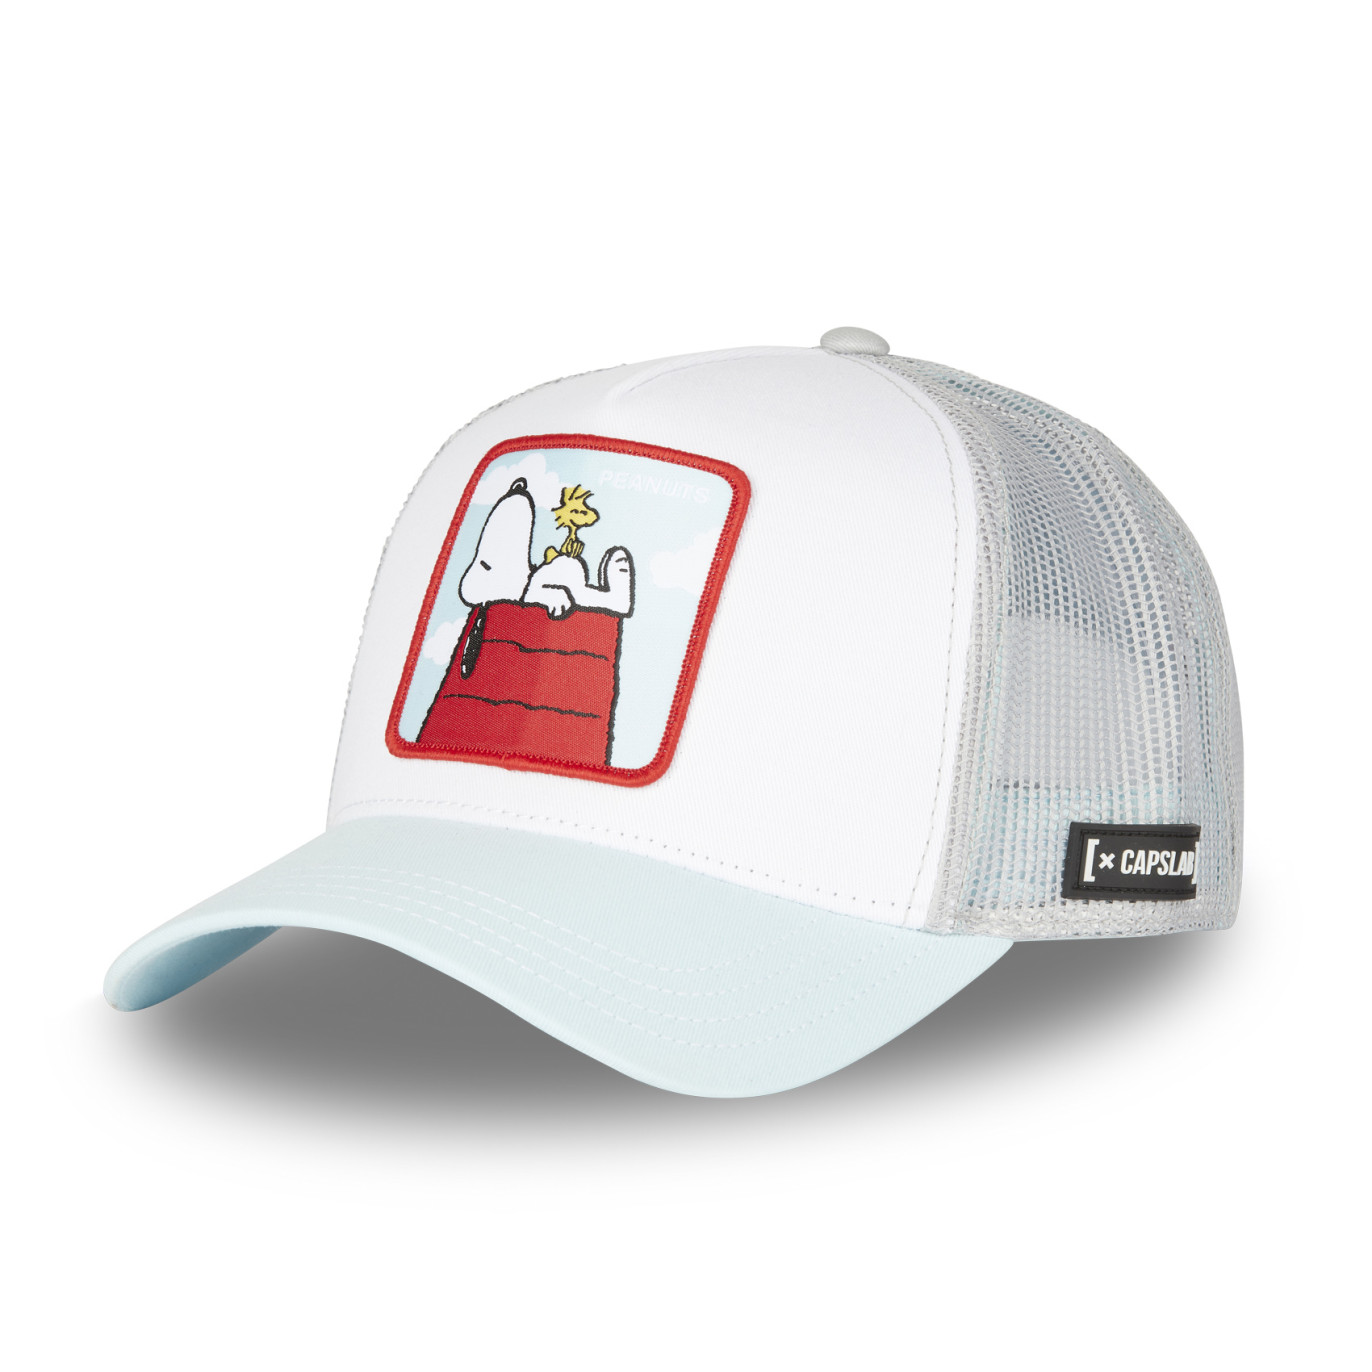 Casquette Trucker Peanuts Snoopy Snapback - Blanche - Capslab Capslab - 1